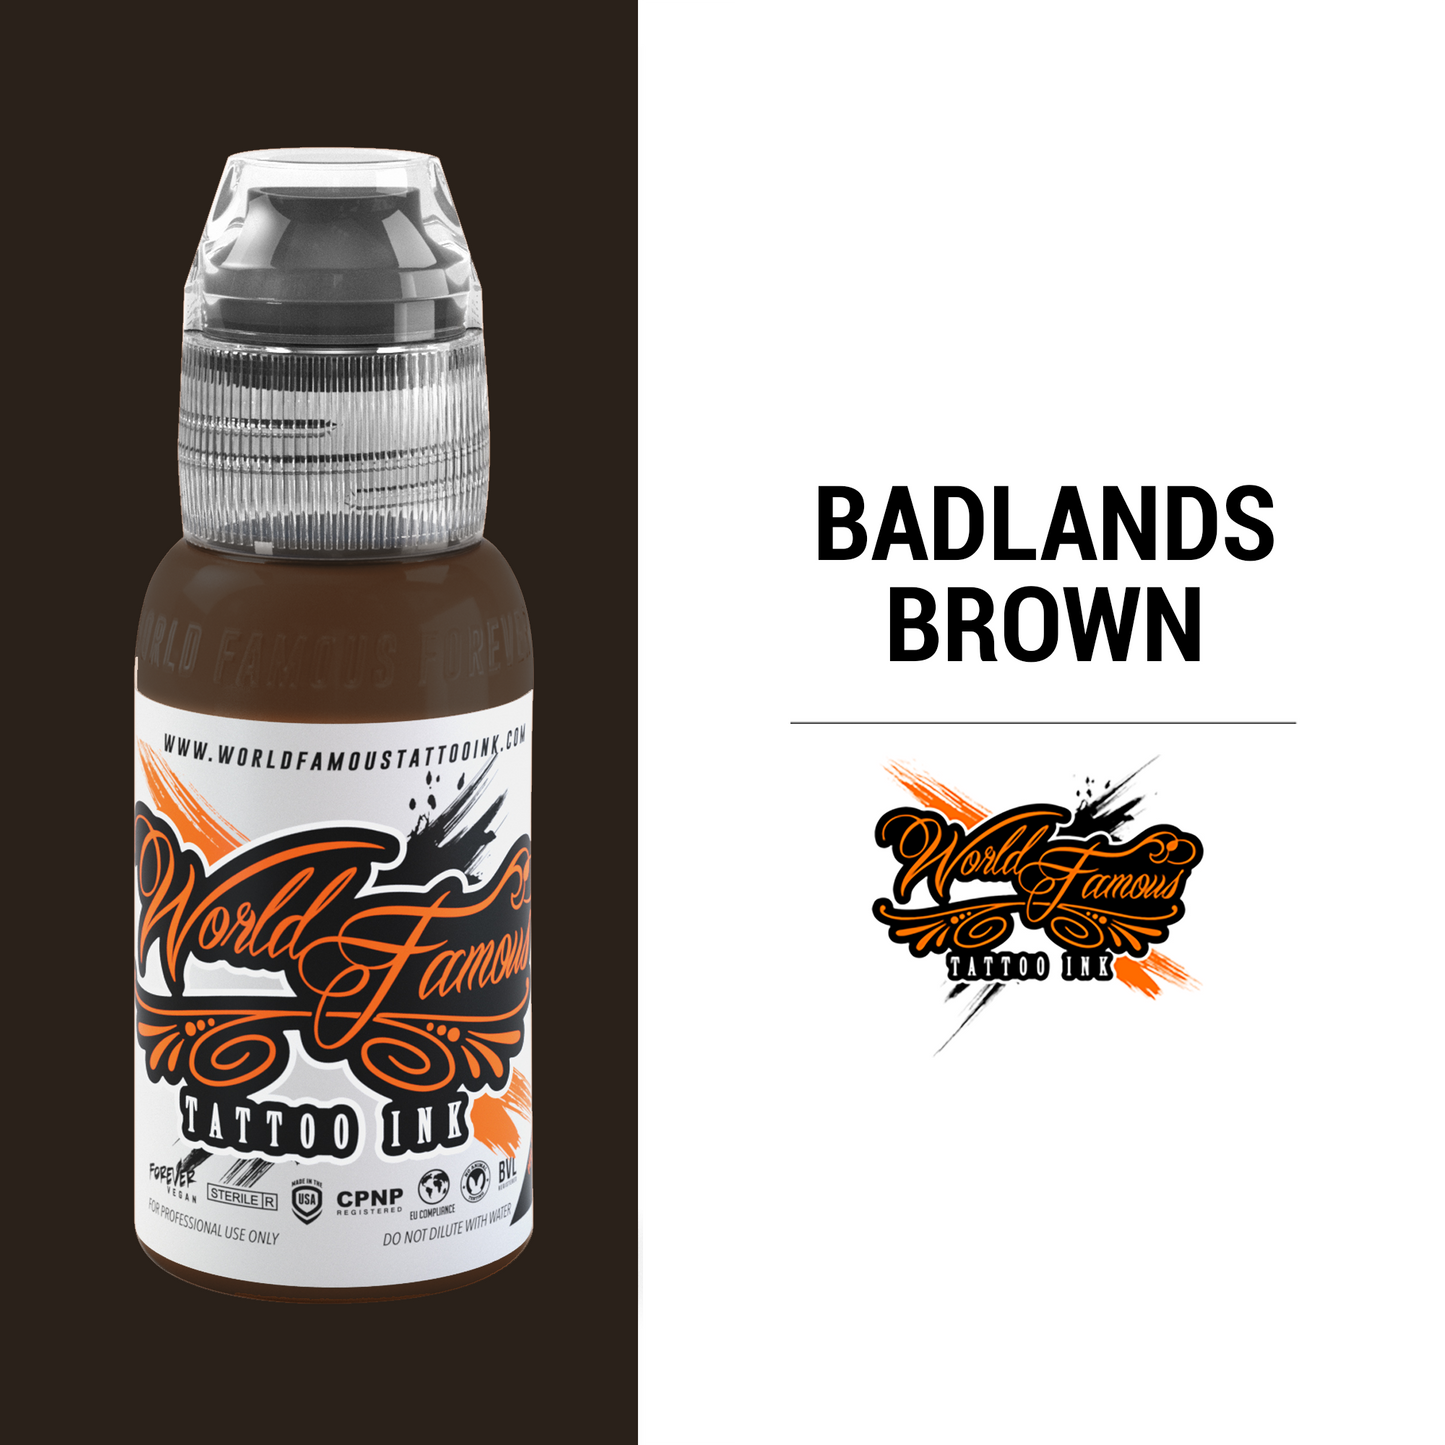 Badlands Brown | World Famous Tattoo Ink